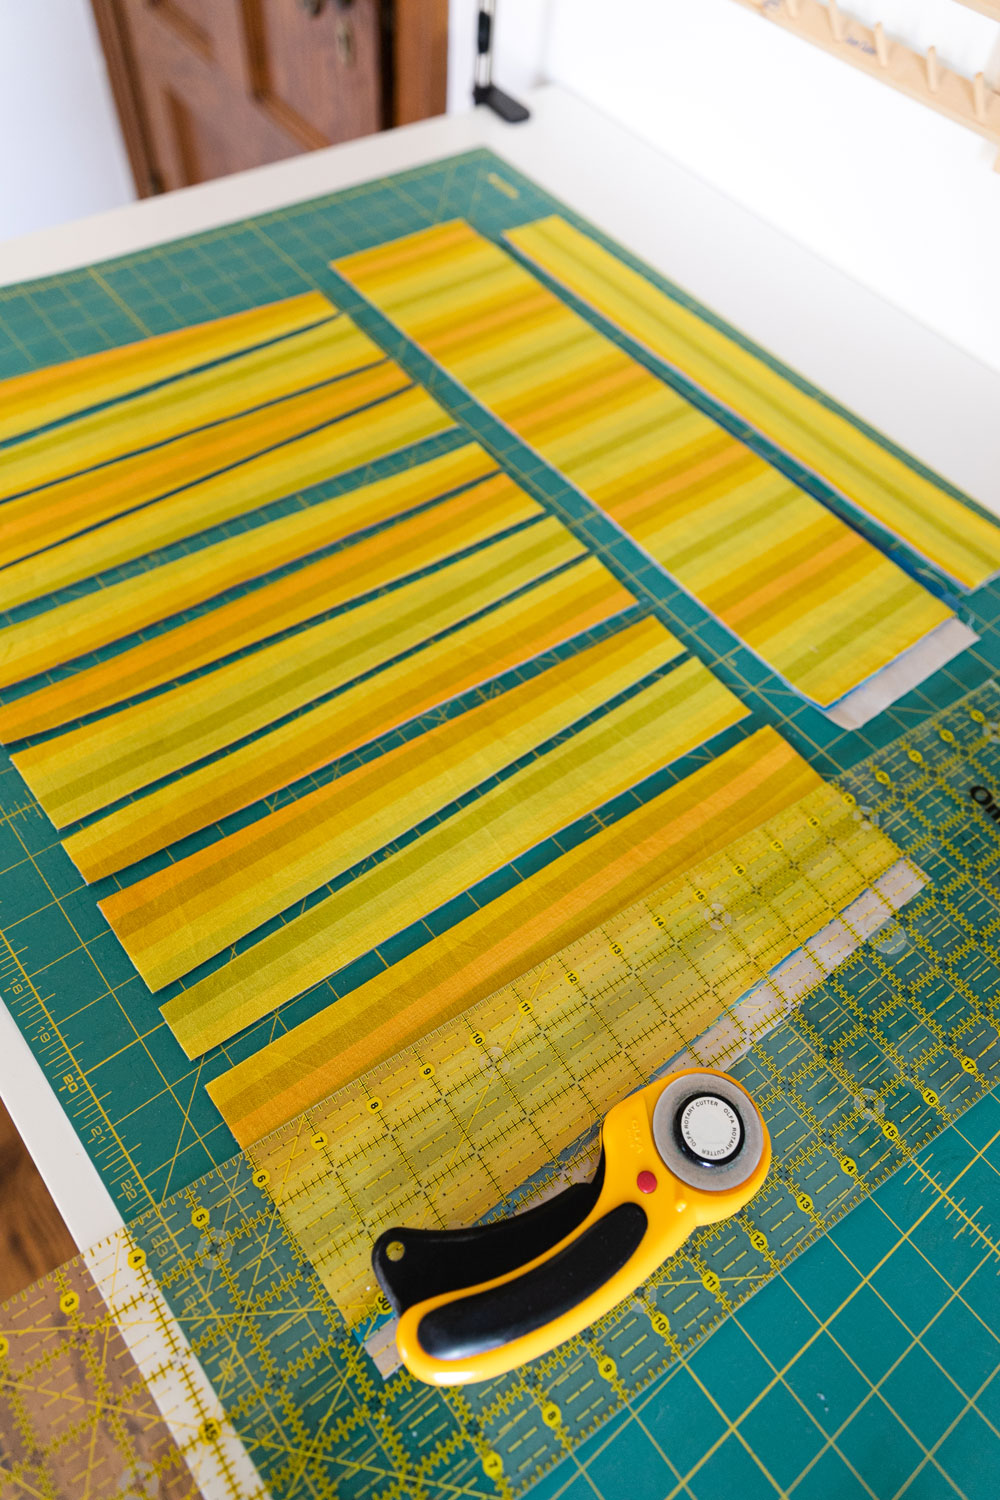 The Shine quilt sew along includes lots of added tips and videos to help you make this modern quilt pattern. This fat quarter quilt pattern is beginner friendly and focuses on improv sewing. suzyquilts.com #modernquilt #qal